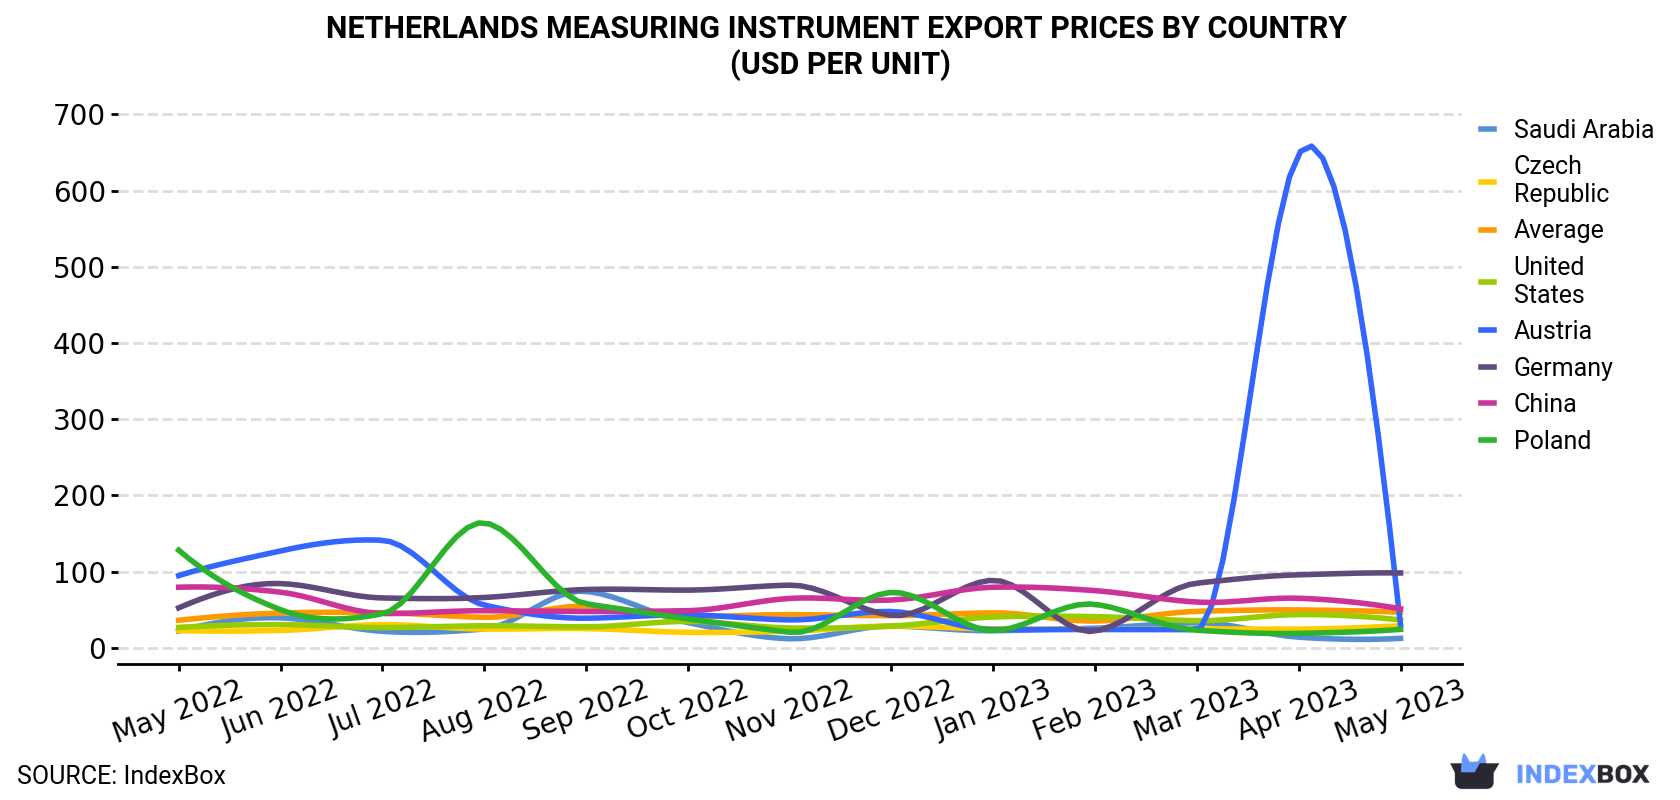 Netherlands Measuring Instrument Export Prices By Country (USD Per Unit)